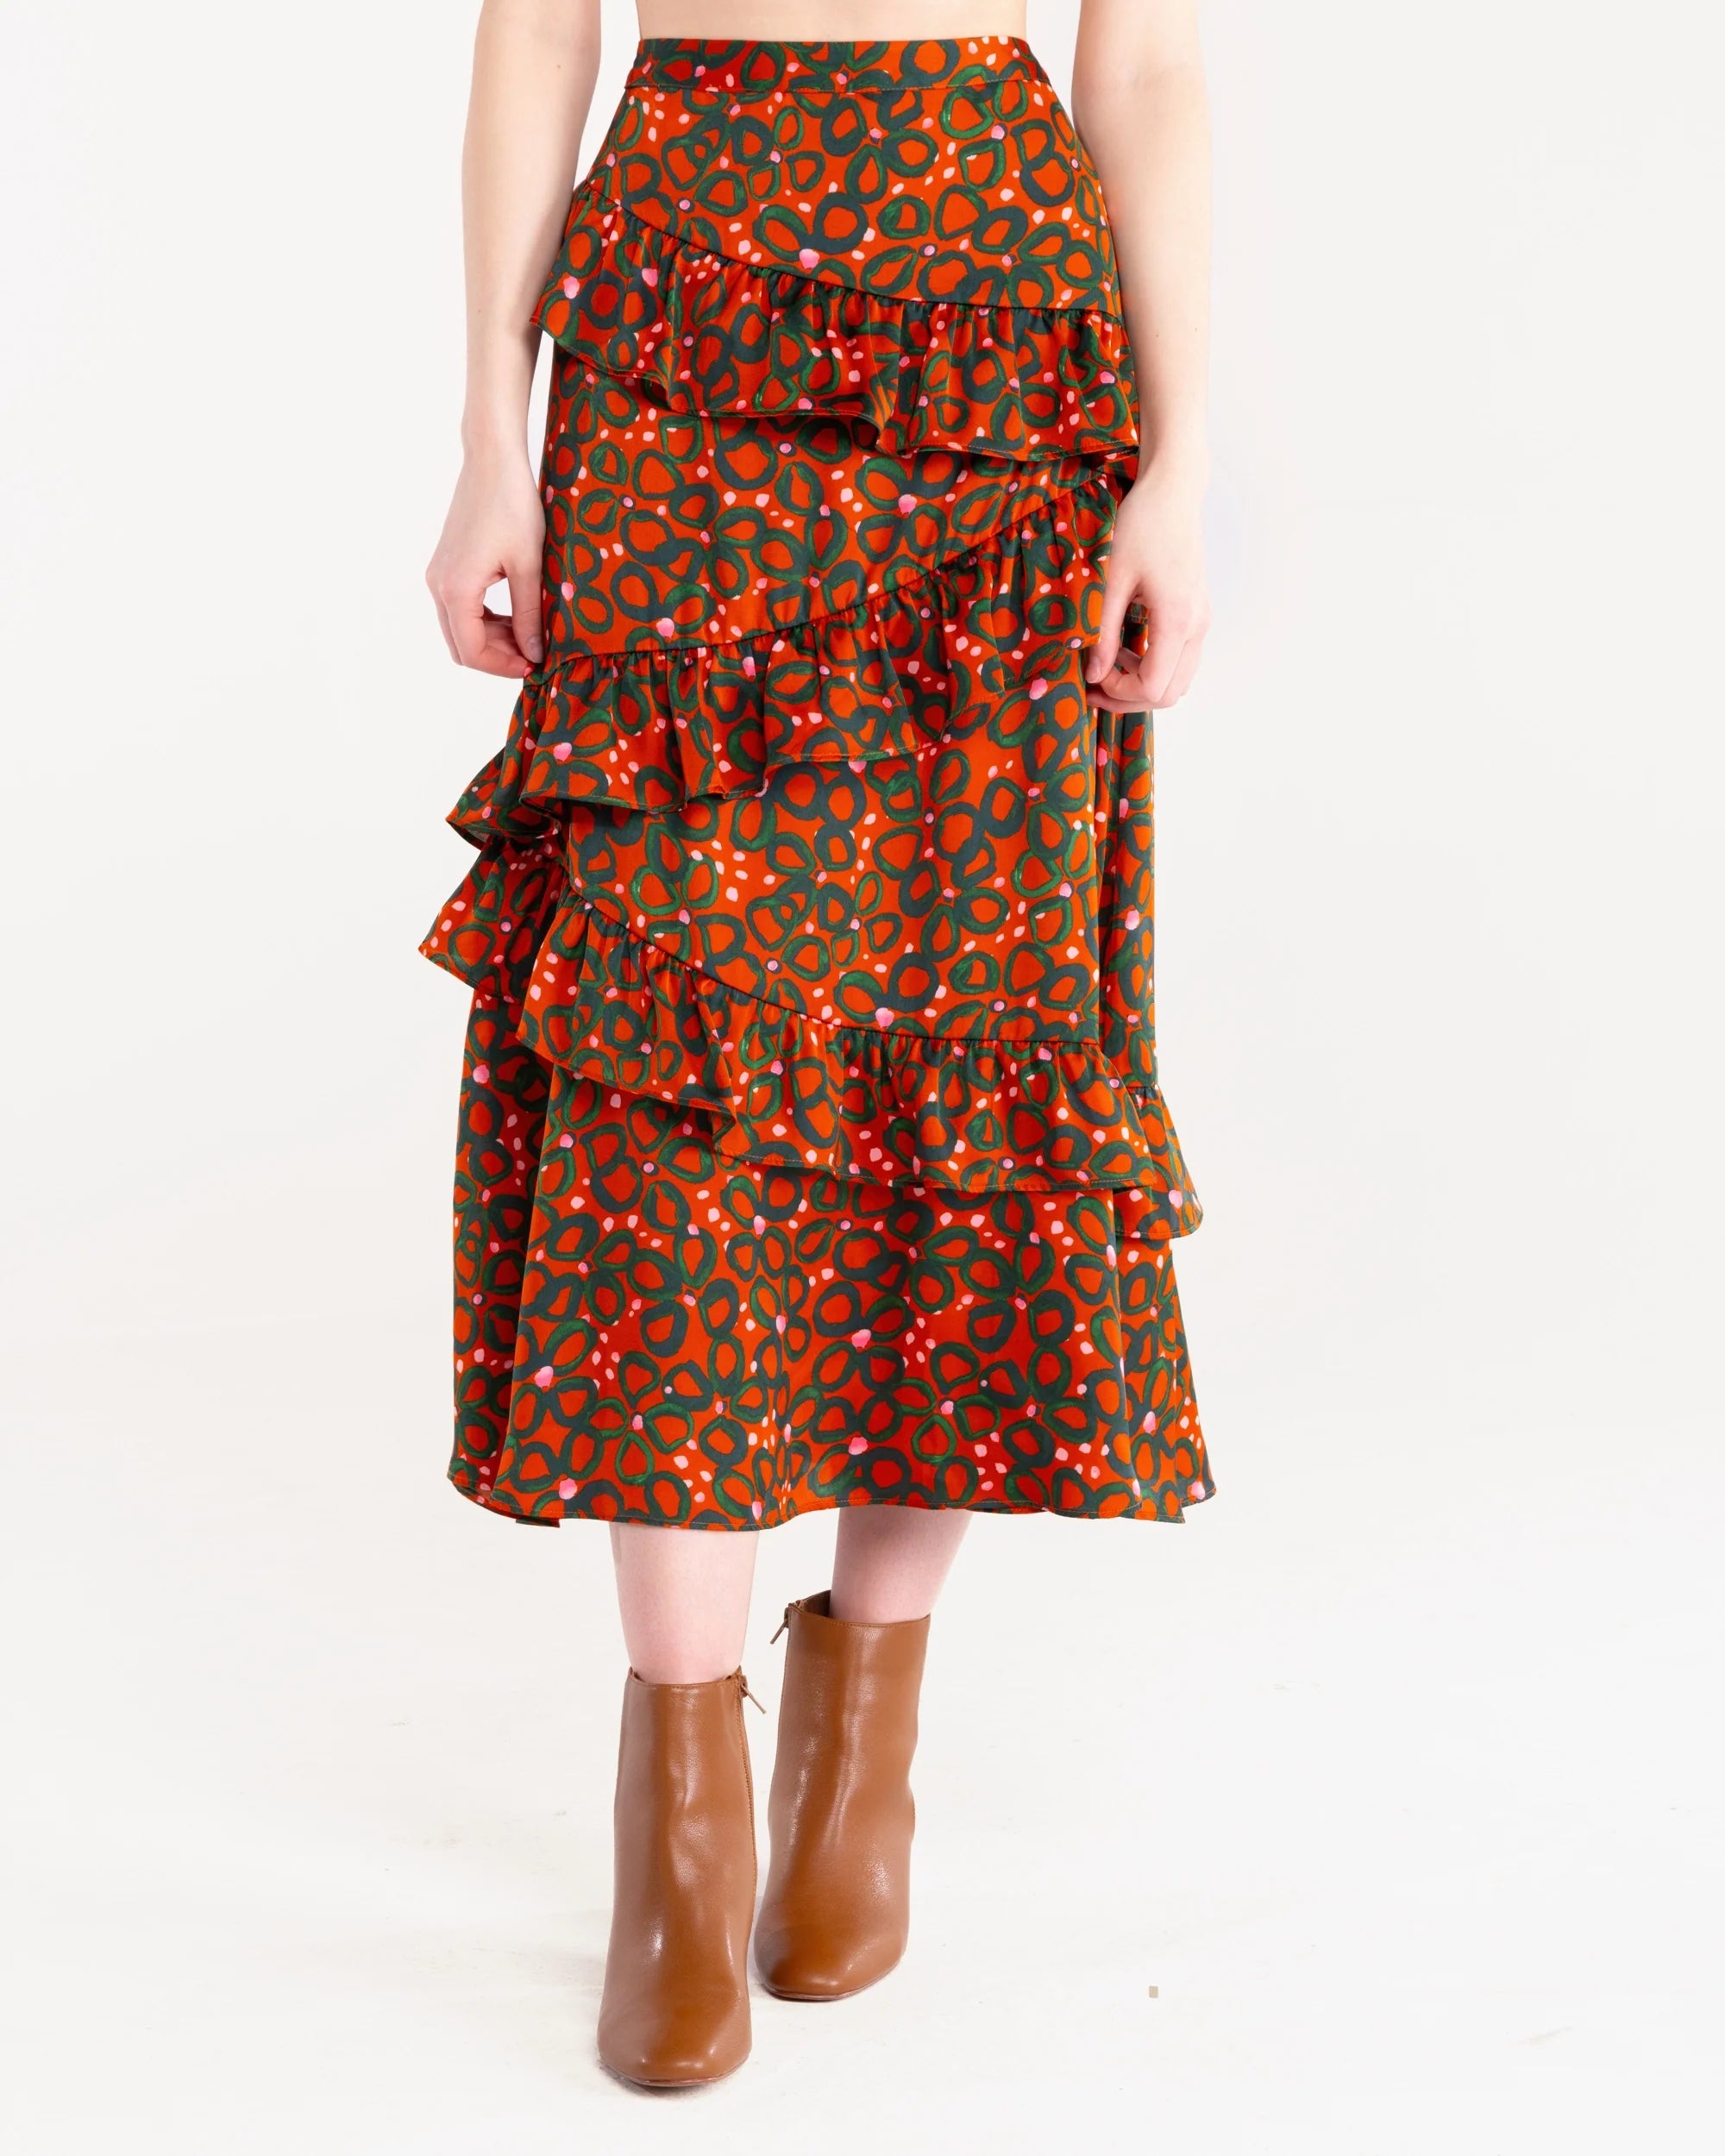 Griffin Skirt- Disco Floral